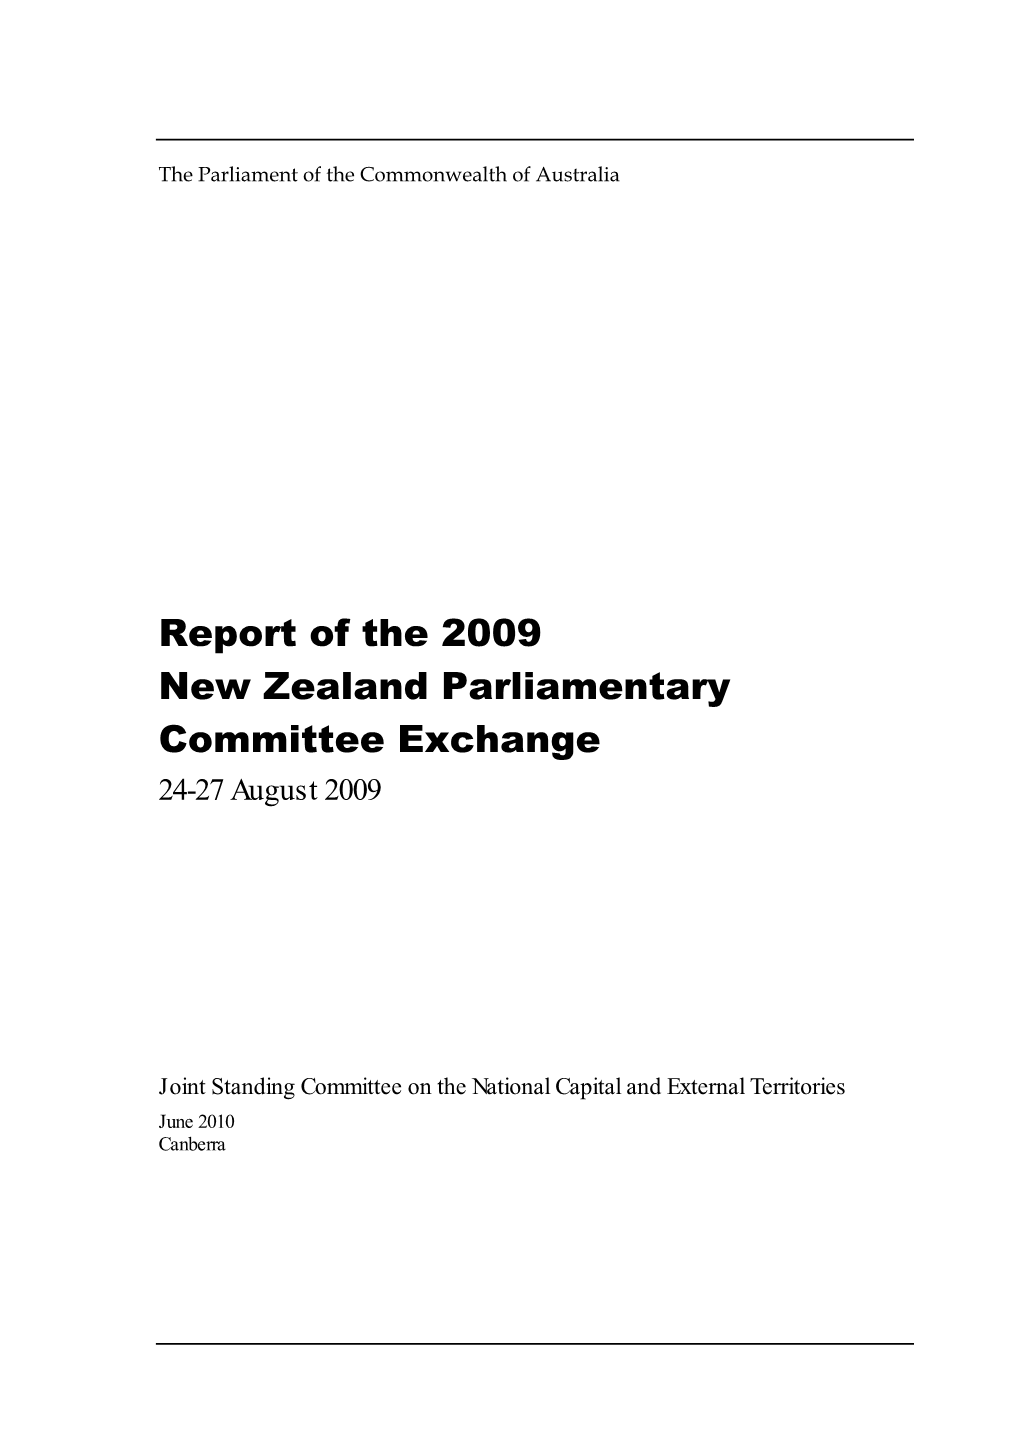 Report of the 2009 New Zealand Parliamentary Committee Exchange 24-27 August 2009